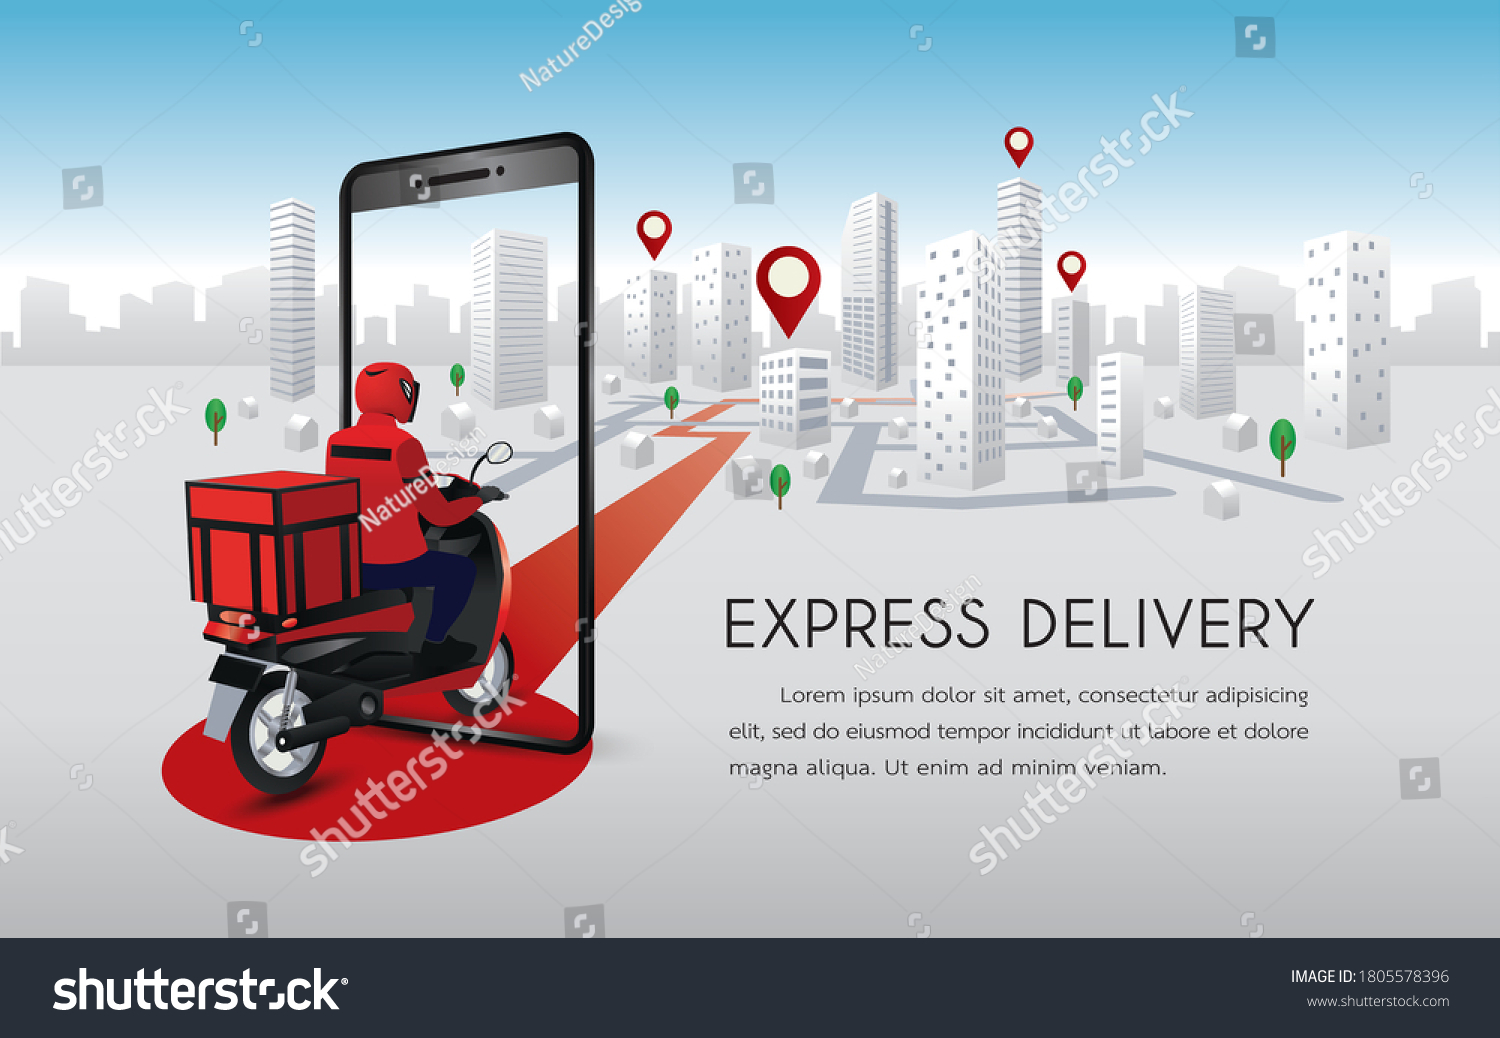 Fast Delivery Man Motorcycles Customers Ordering Stock Vector Royalty Free 1805578396 6397